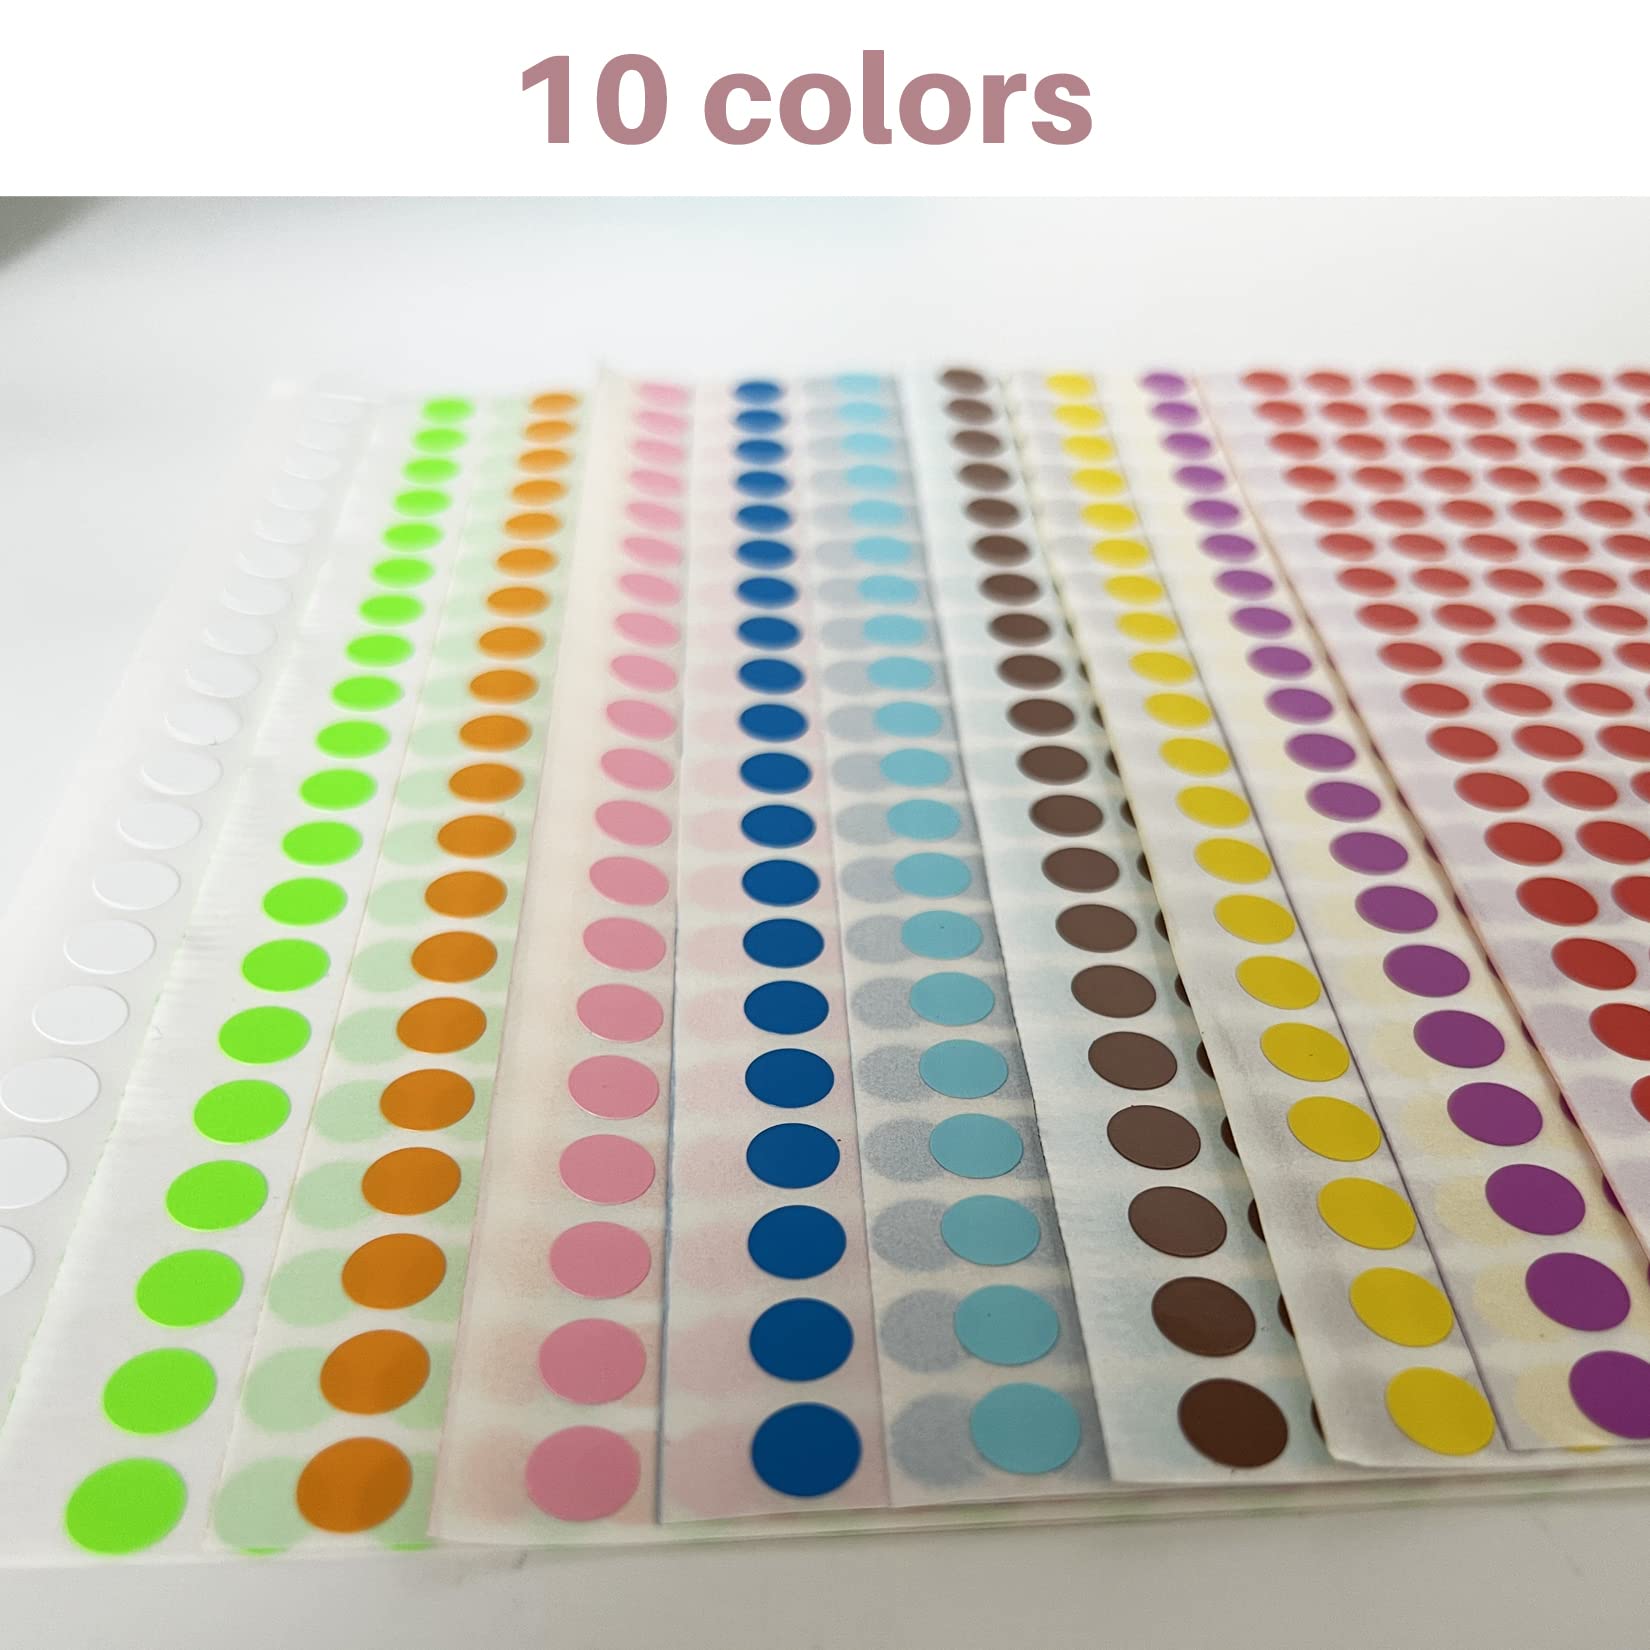 8mm Diameter Round Dot Stickers 2800 Pieces, 10 Pack Colorful Circle Dot Labels, Sticky Marking Colored Dots, Self Adhesive